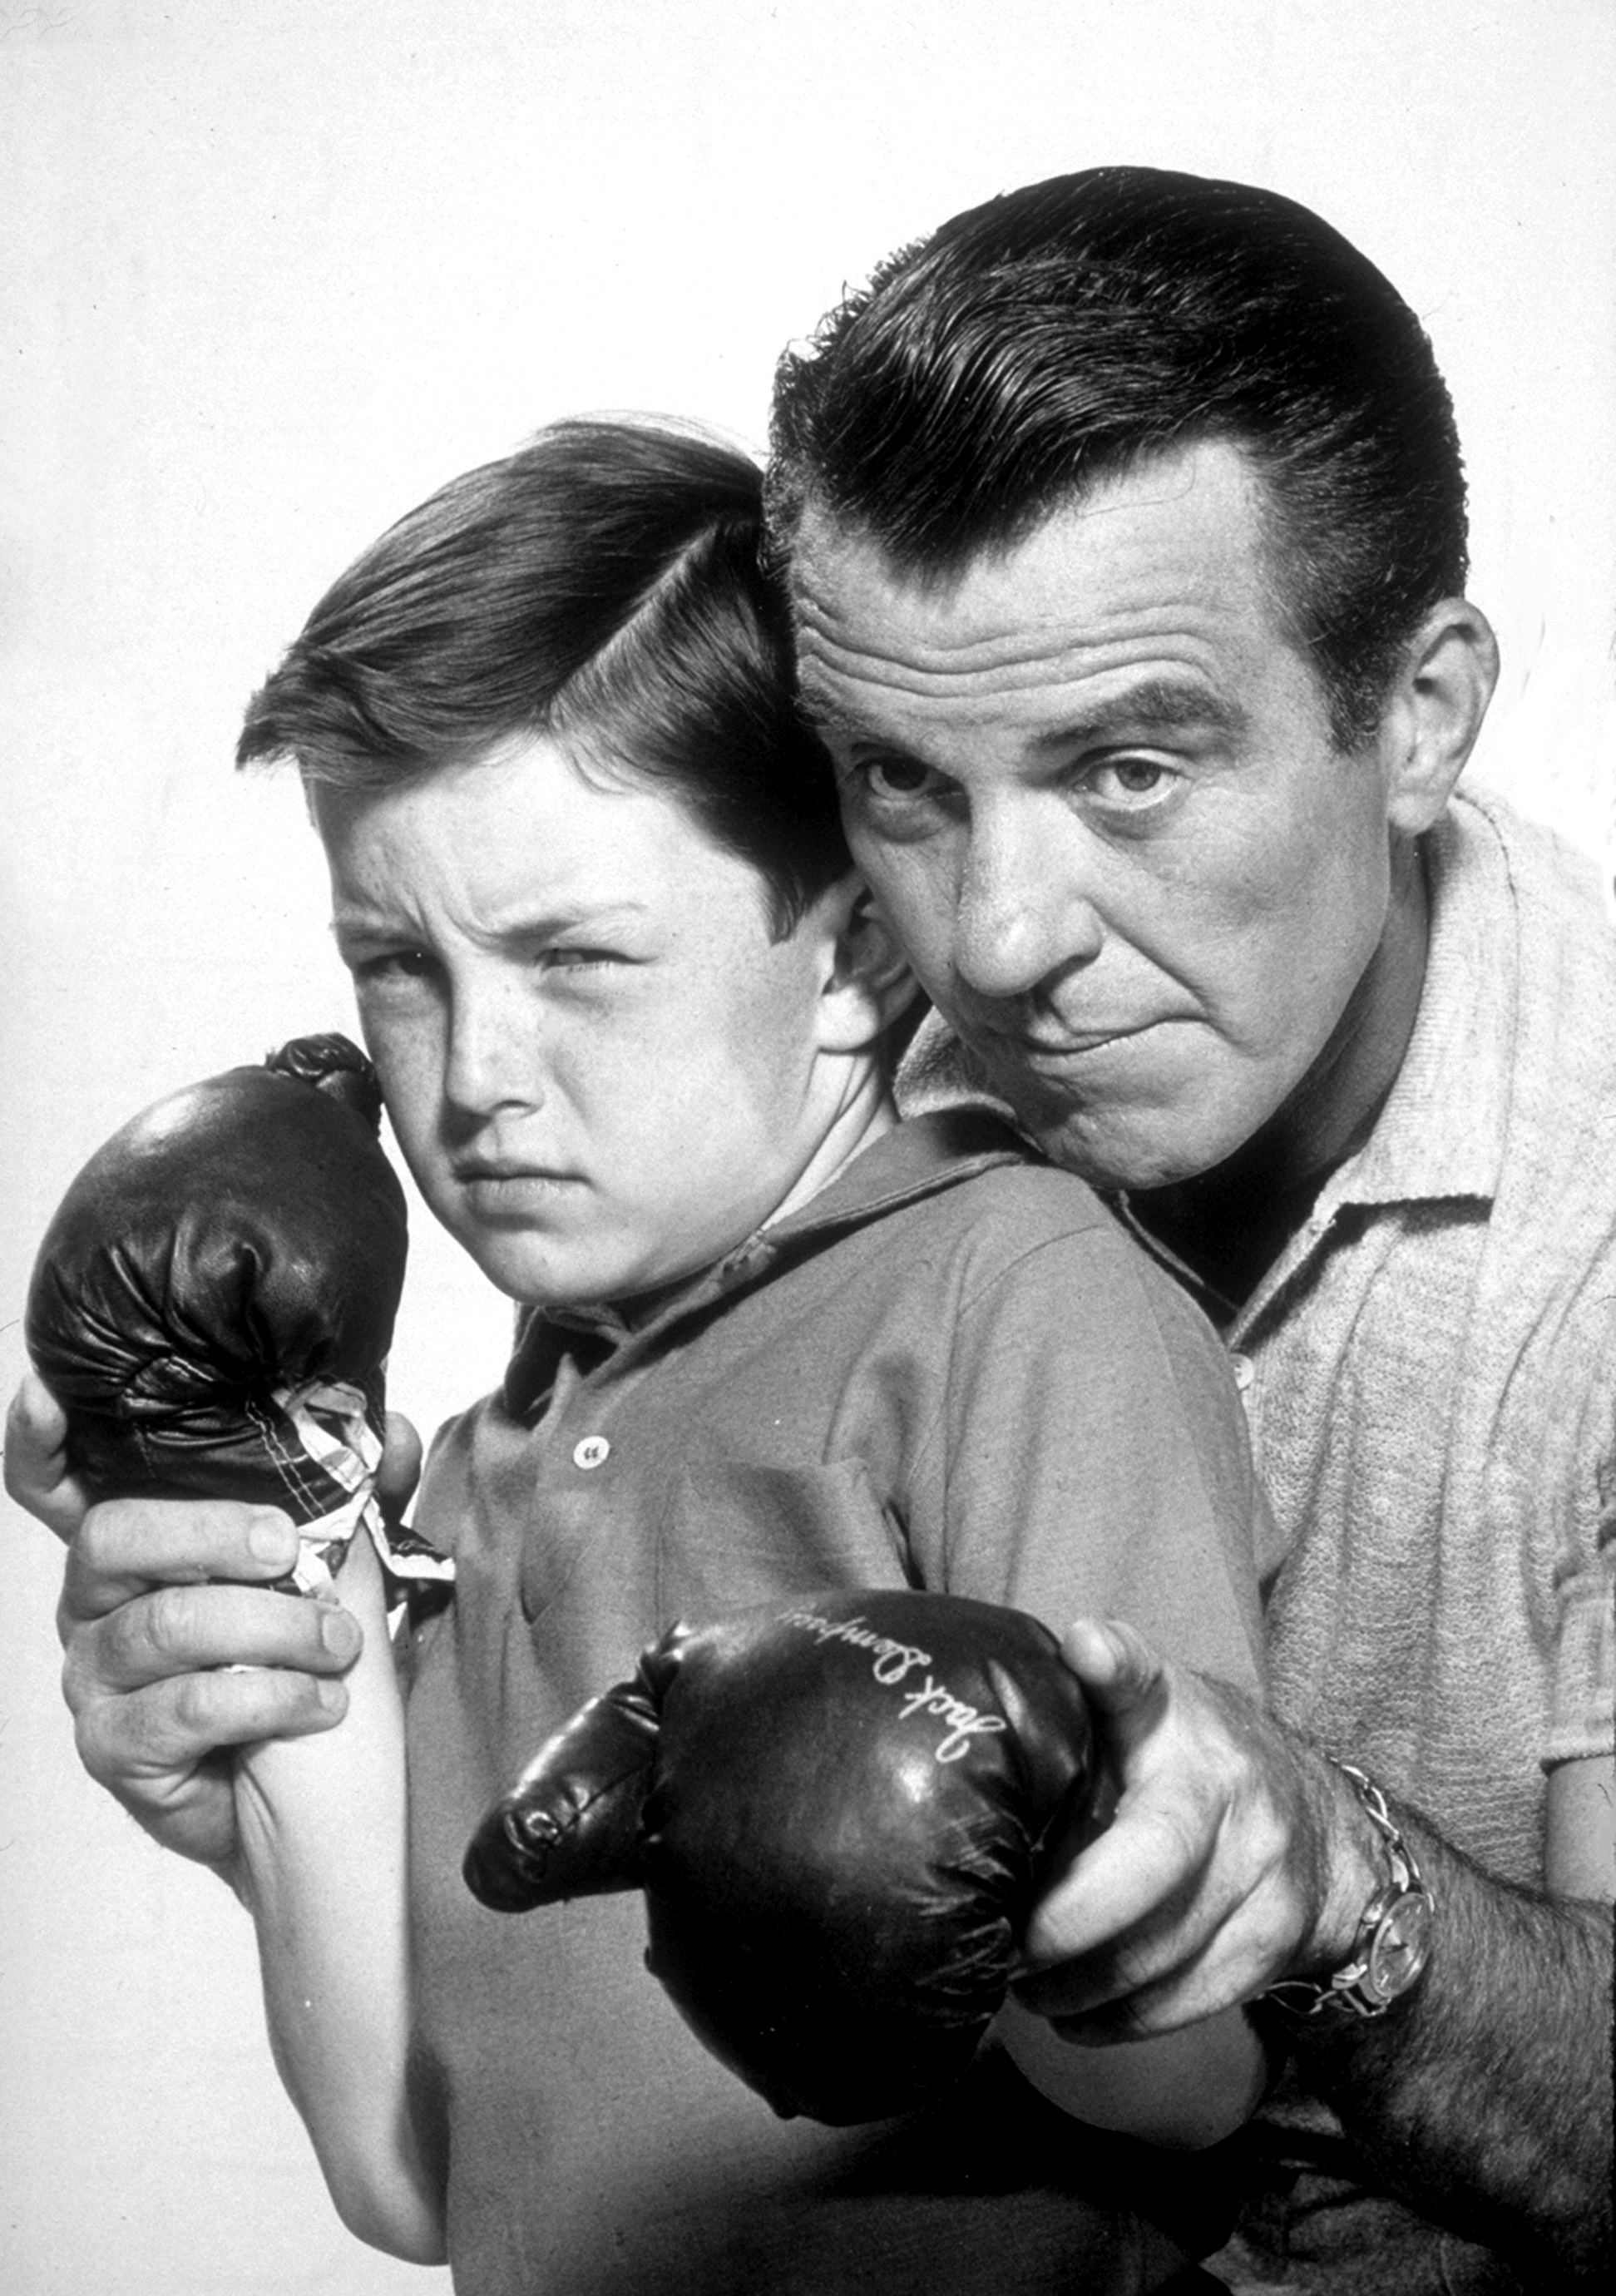 Hugh Beaumont, right, gives Jerry Mathers a boxing lesson in a scene from 'Leave It to Beaver,' 1959